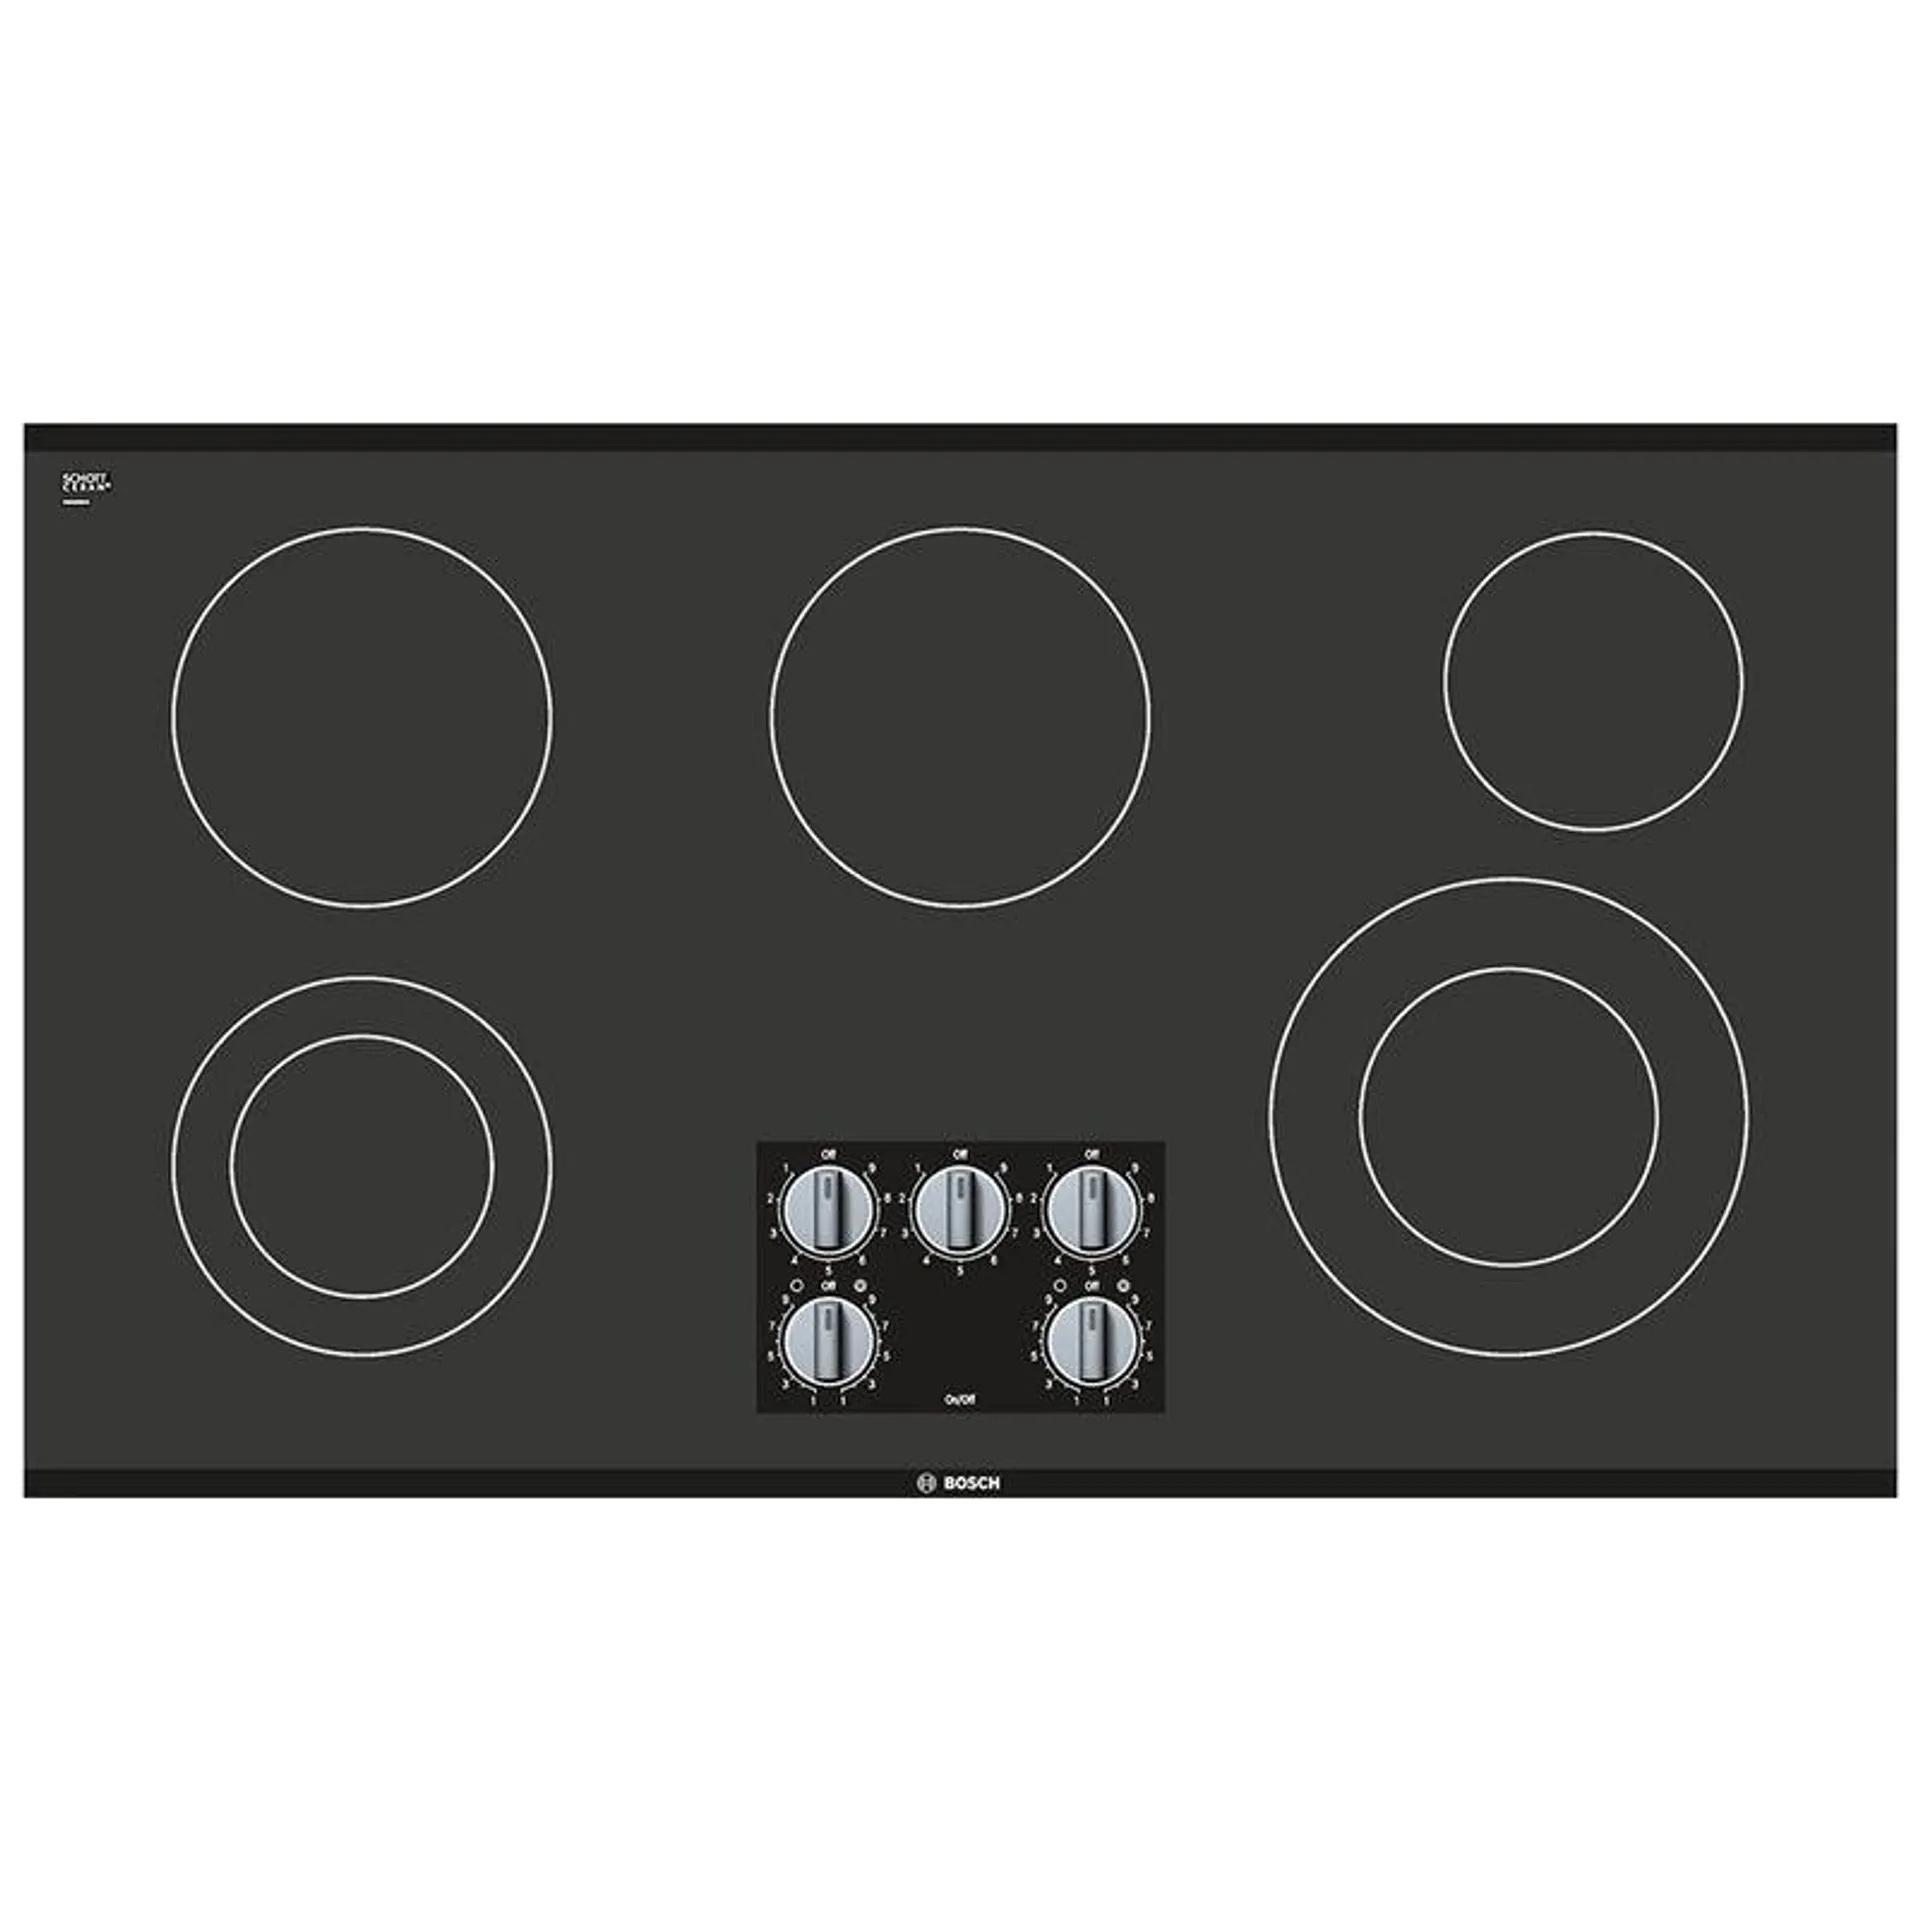 Bosch 500 Series 36 in. Electric Cooktop with 5 Smoothtop Burners - Black